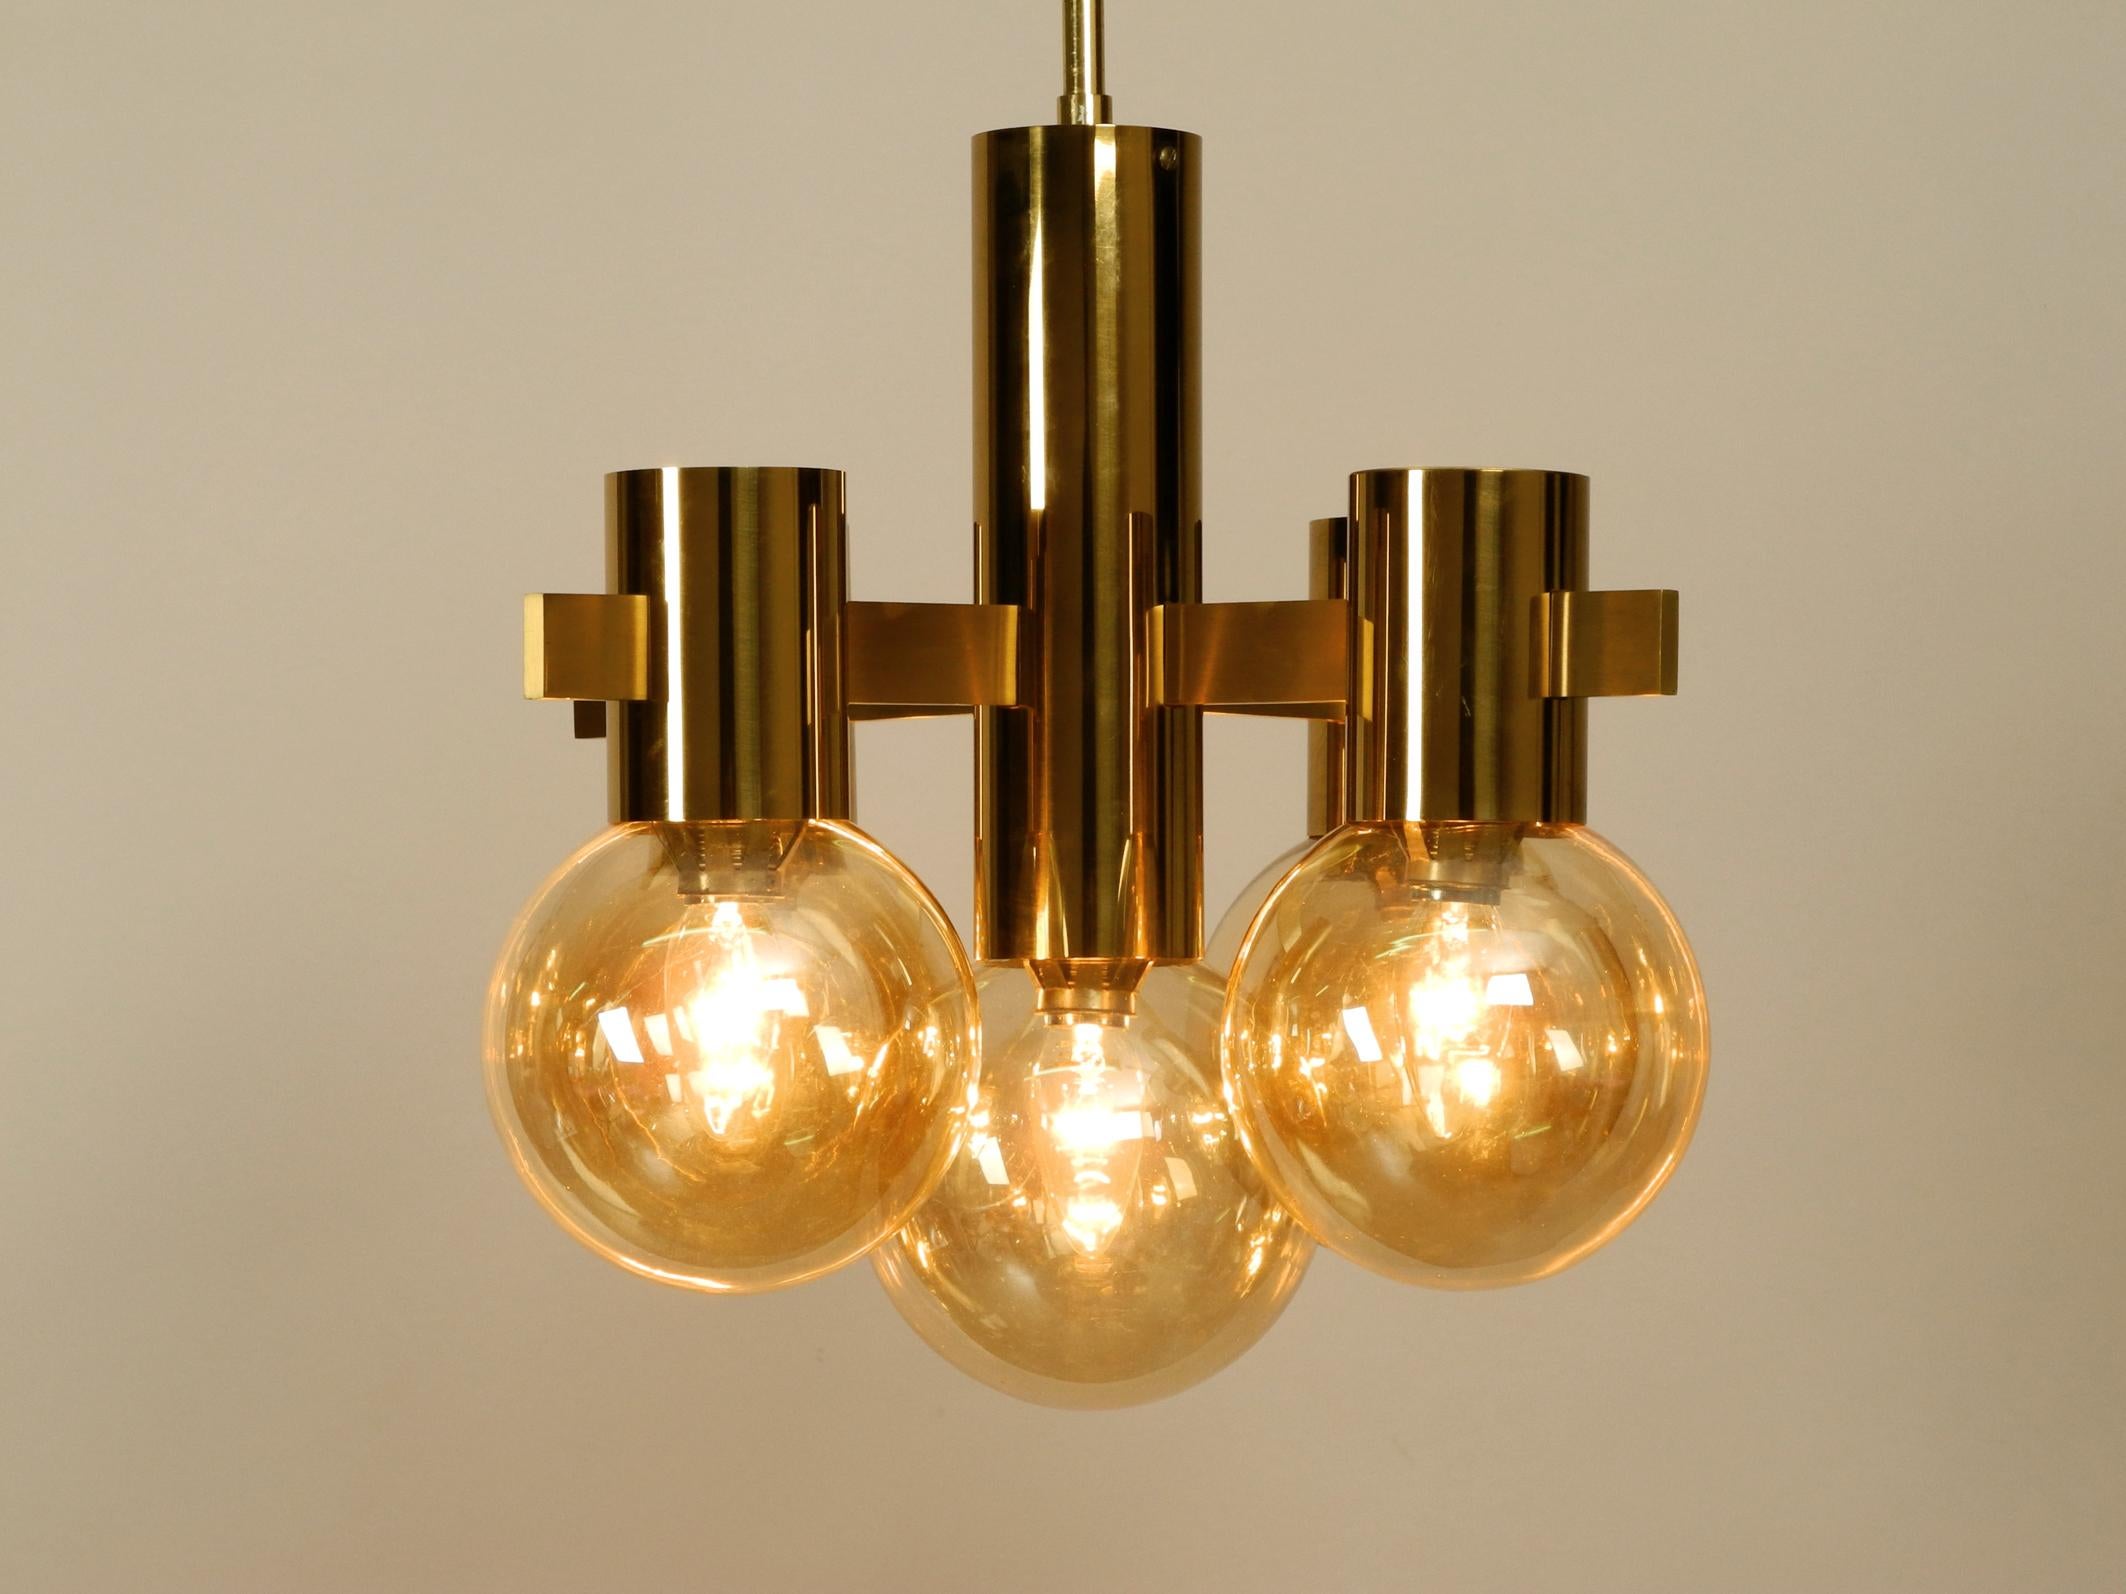 Beautiful 1960s Brass Ceiling Lamp by Hans Agne Jakobsson with 5 Glass Balls 2